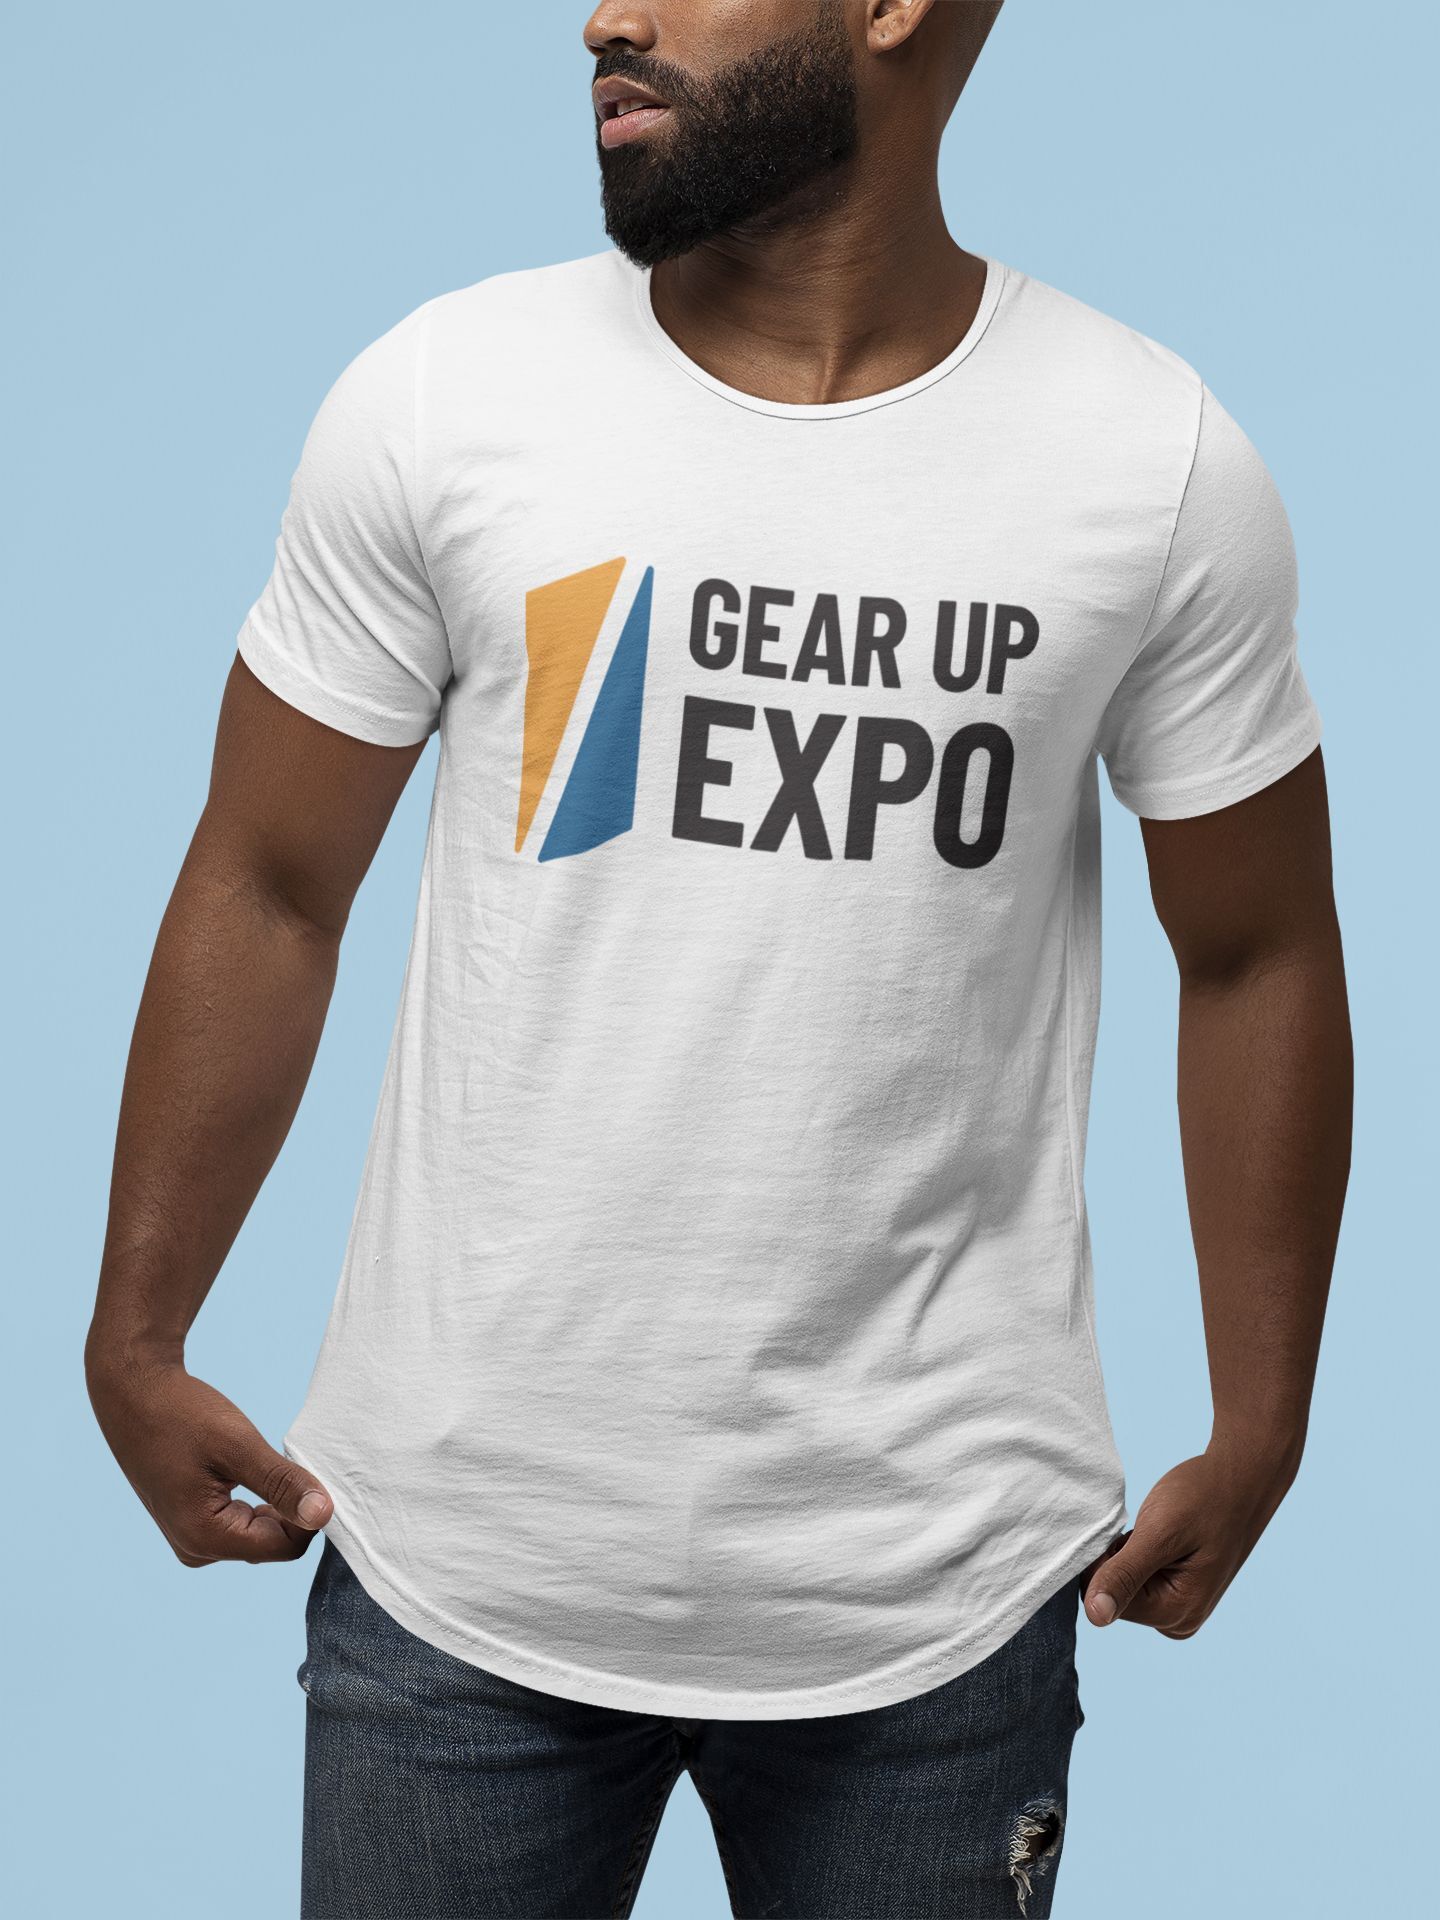 Events attendee t shirt